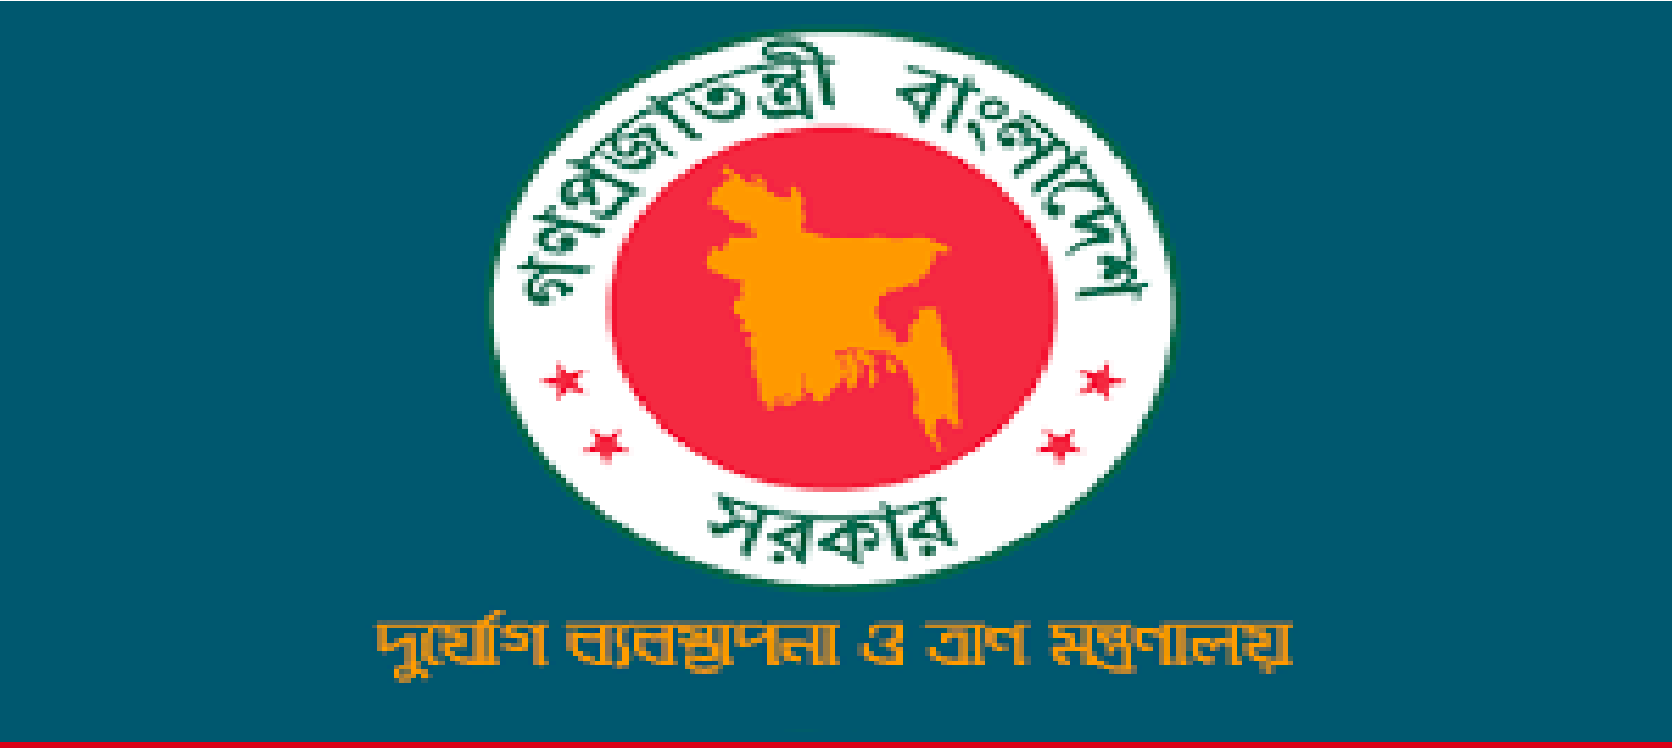 Ministry of Disaster Management and Relief Job Circular Result 2019 Ministry of Disaster Management and Relief Job Circular www.modr.gov.bd